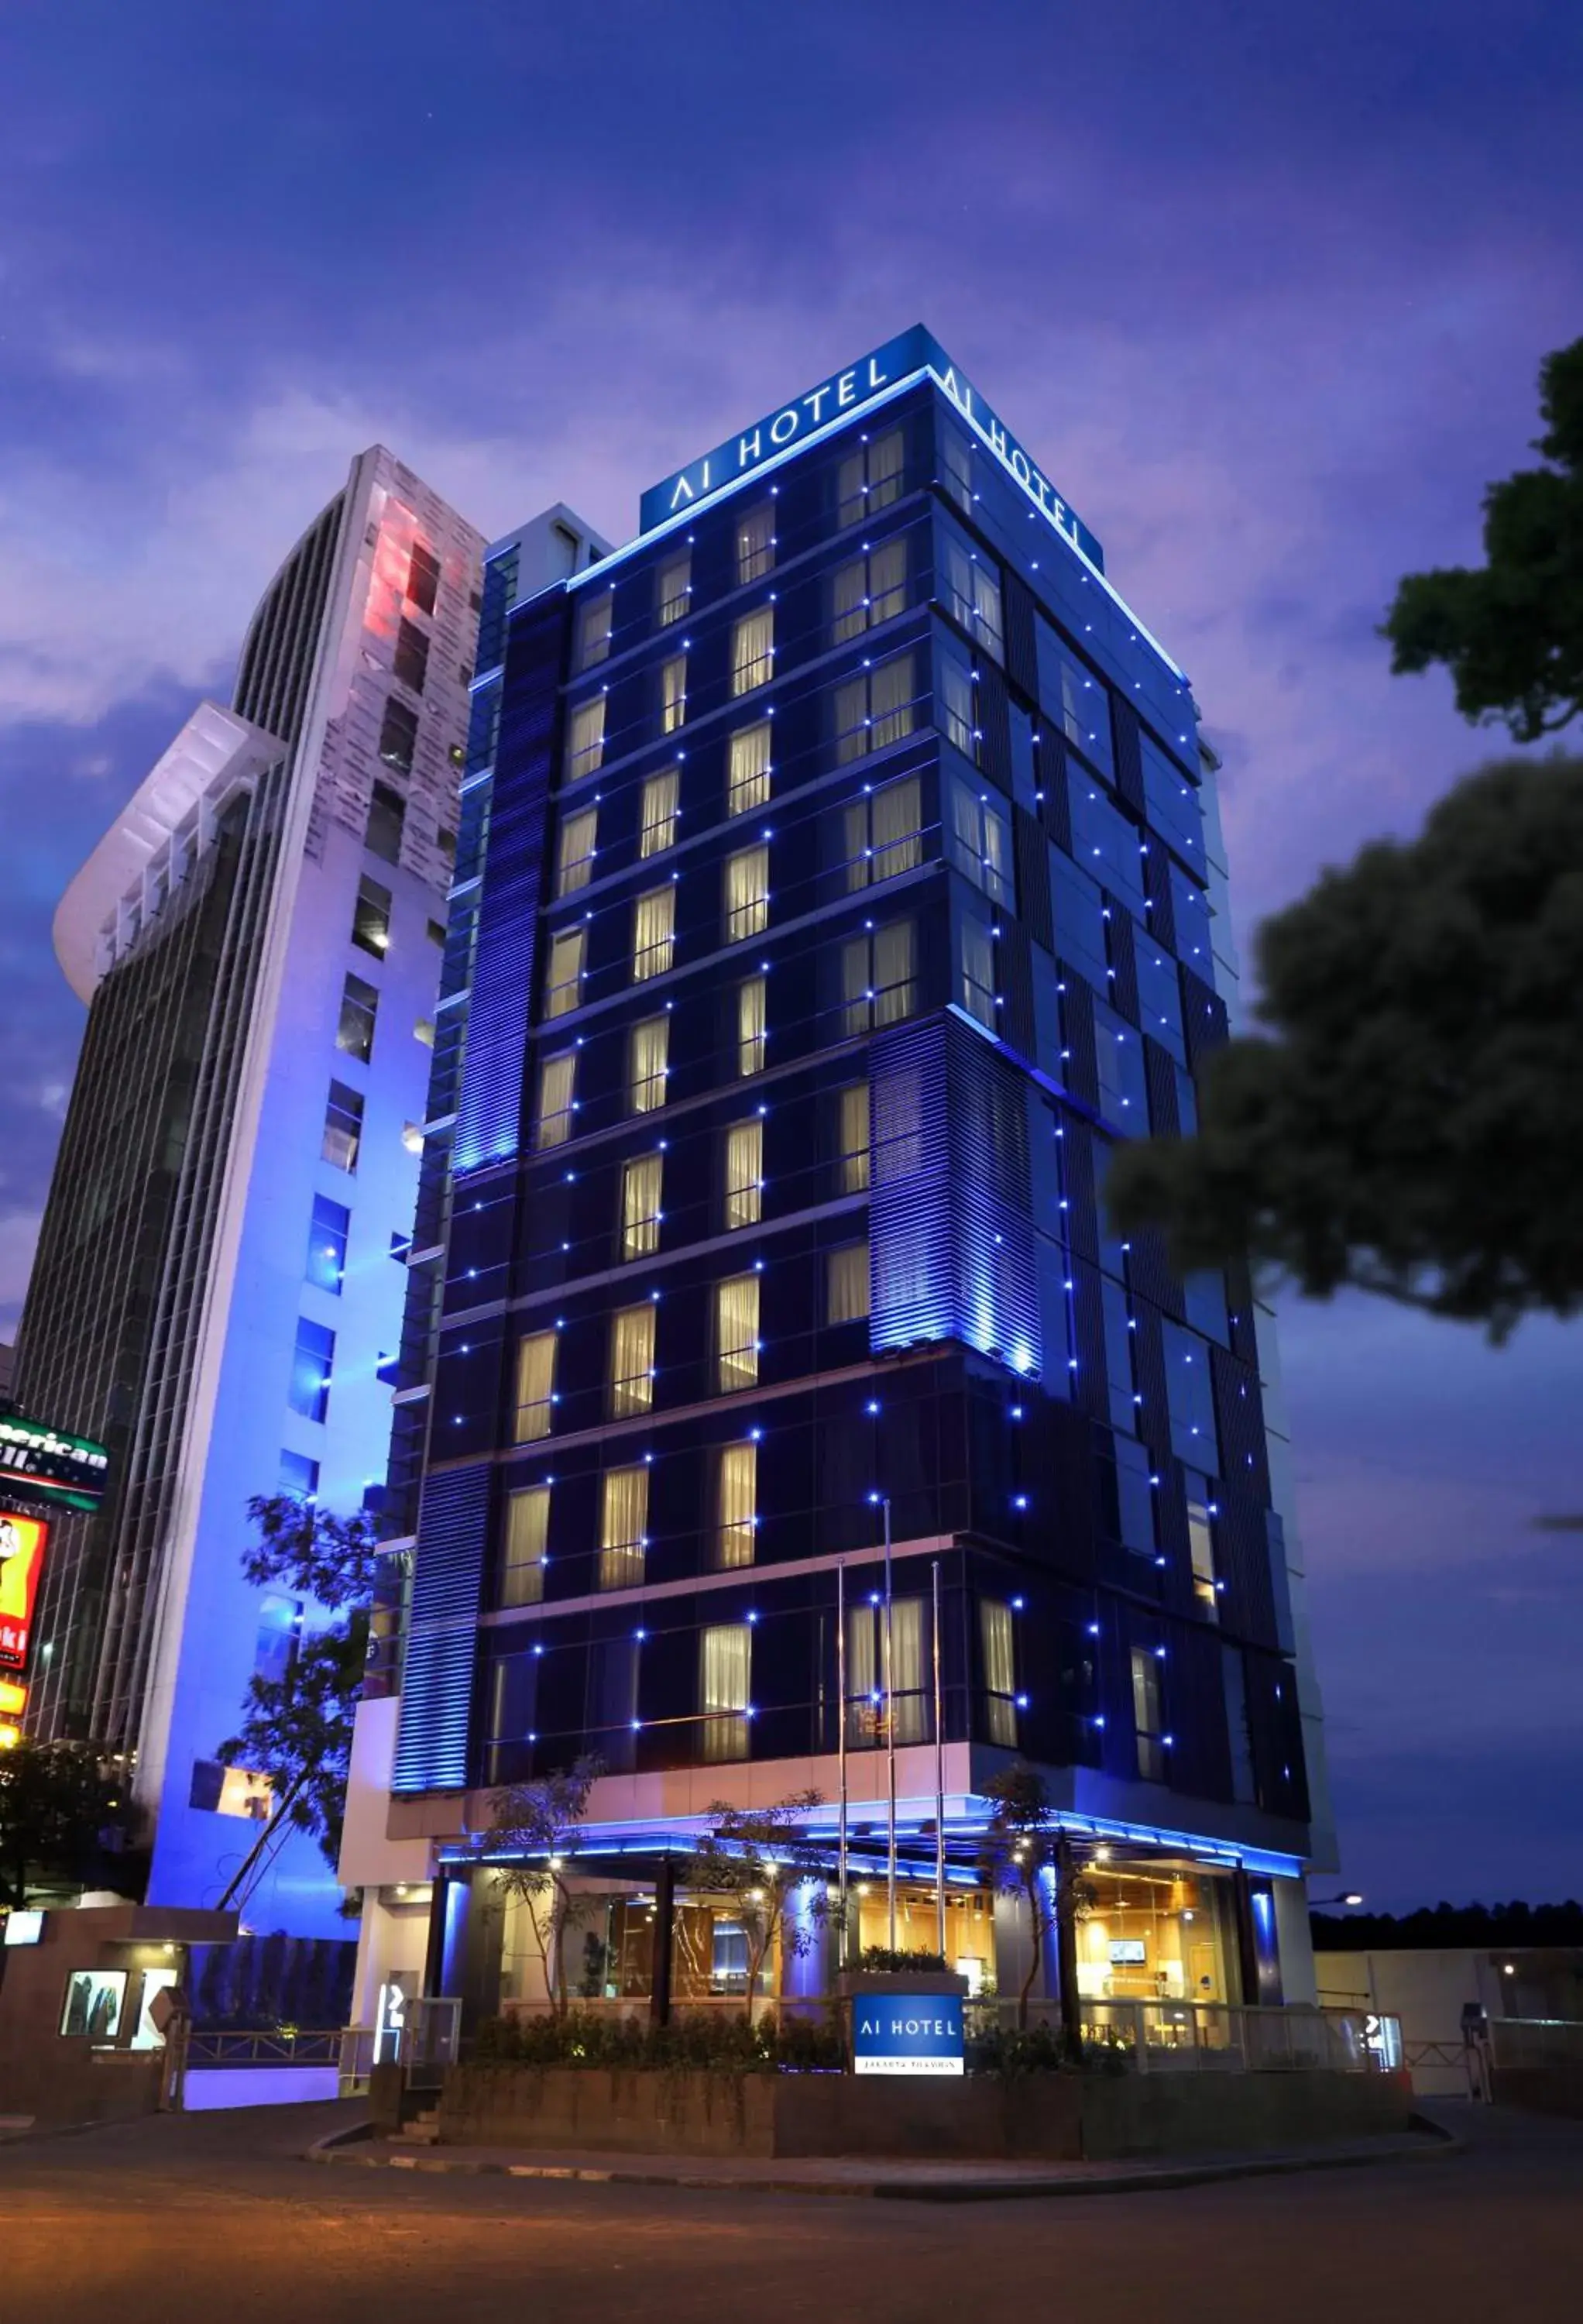 Property Building in AI Hotel Jakarta Thamrin